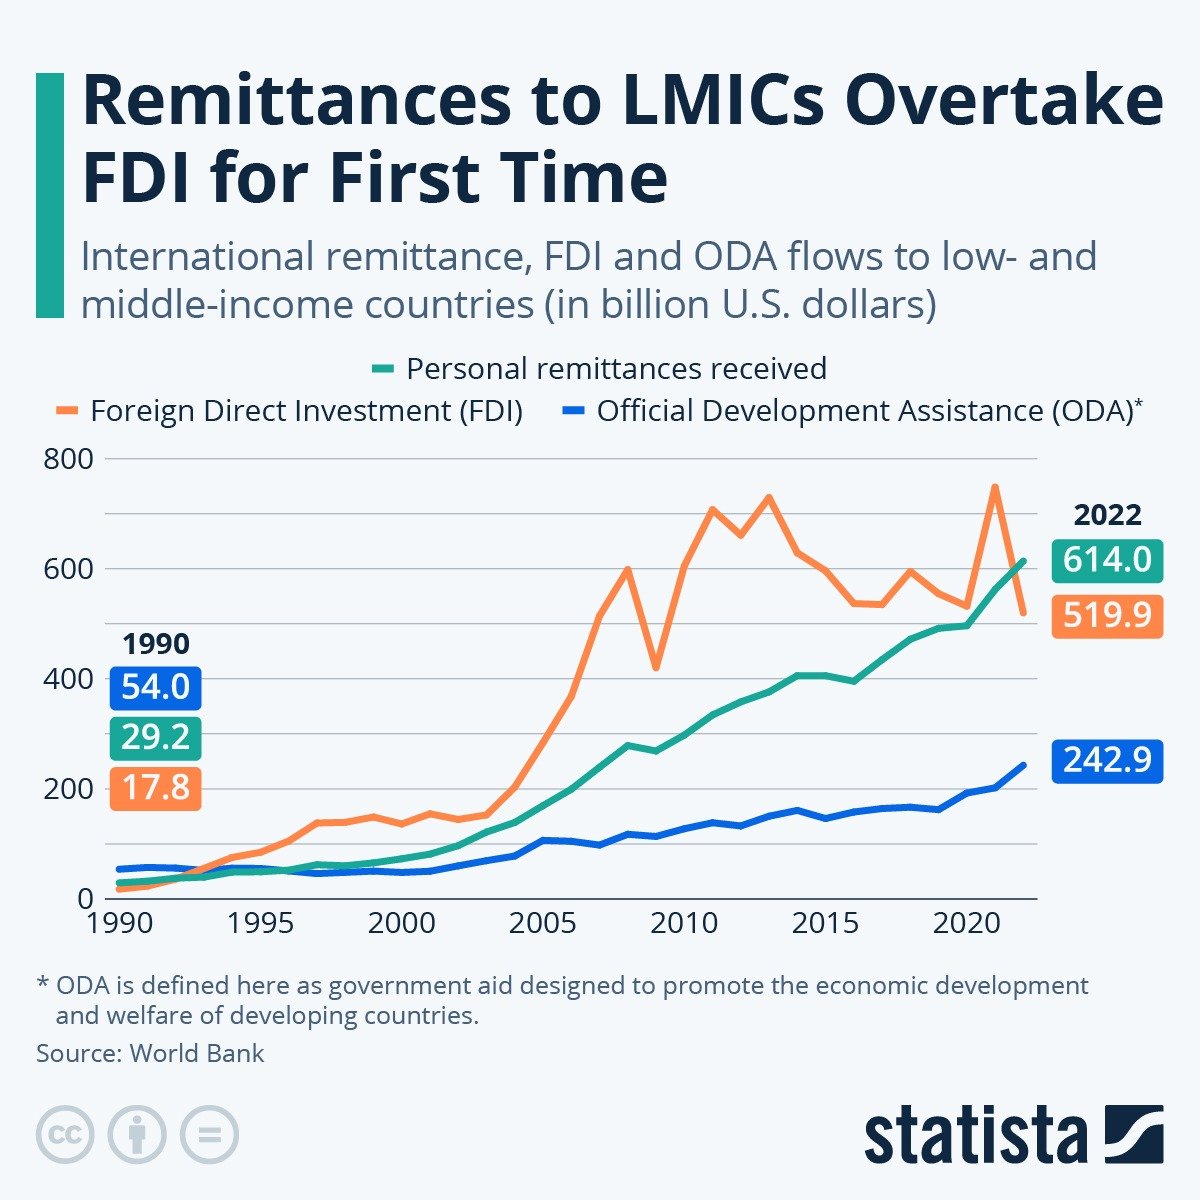 Remittances > FDI for low and middle income countries: